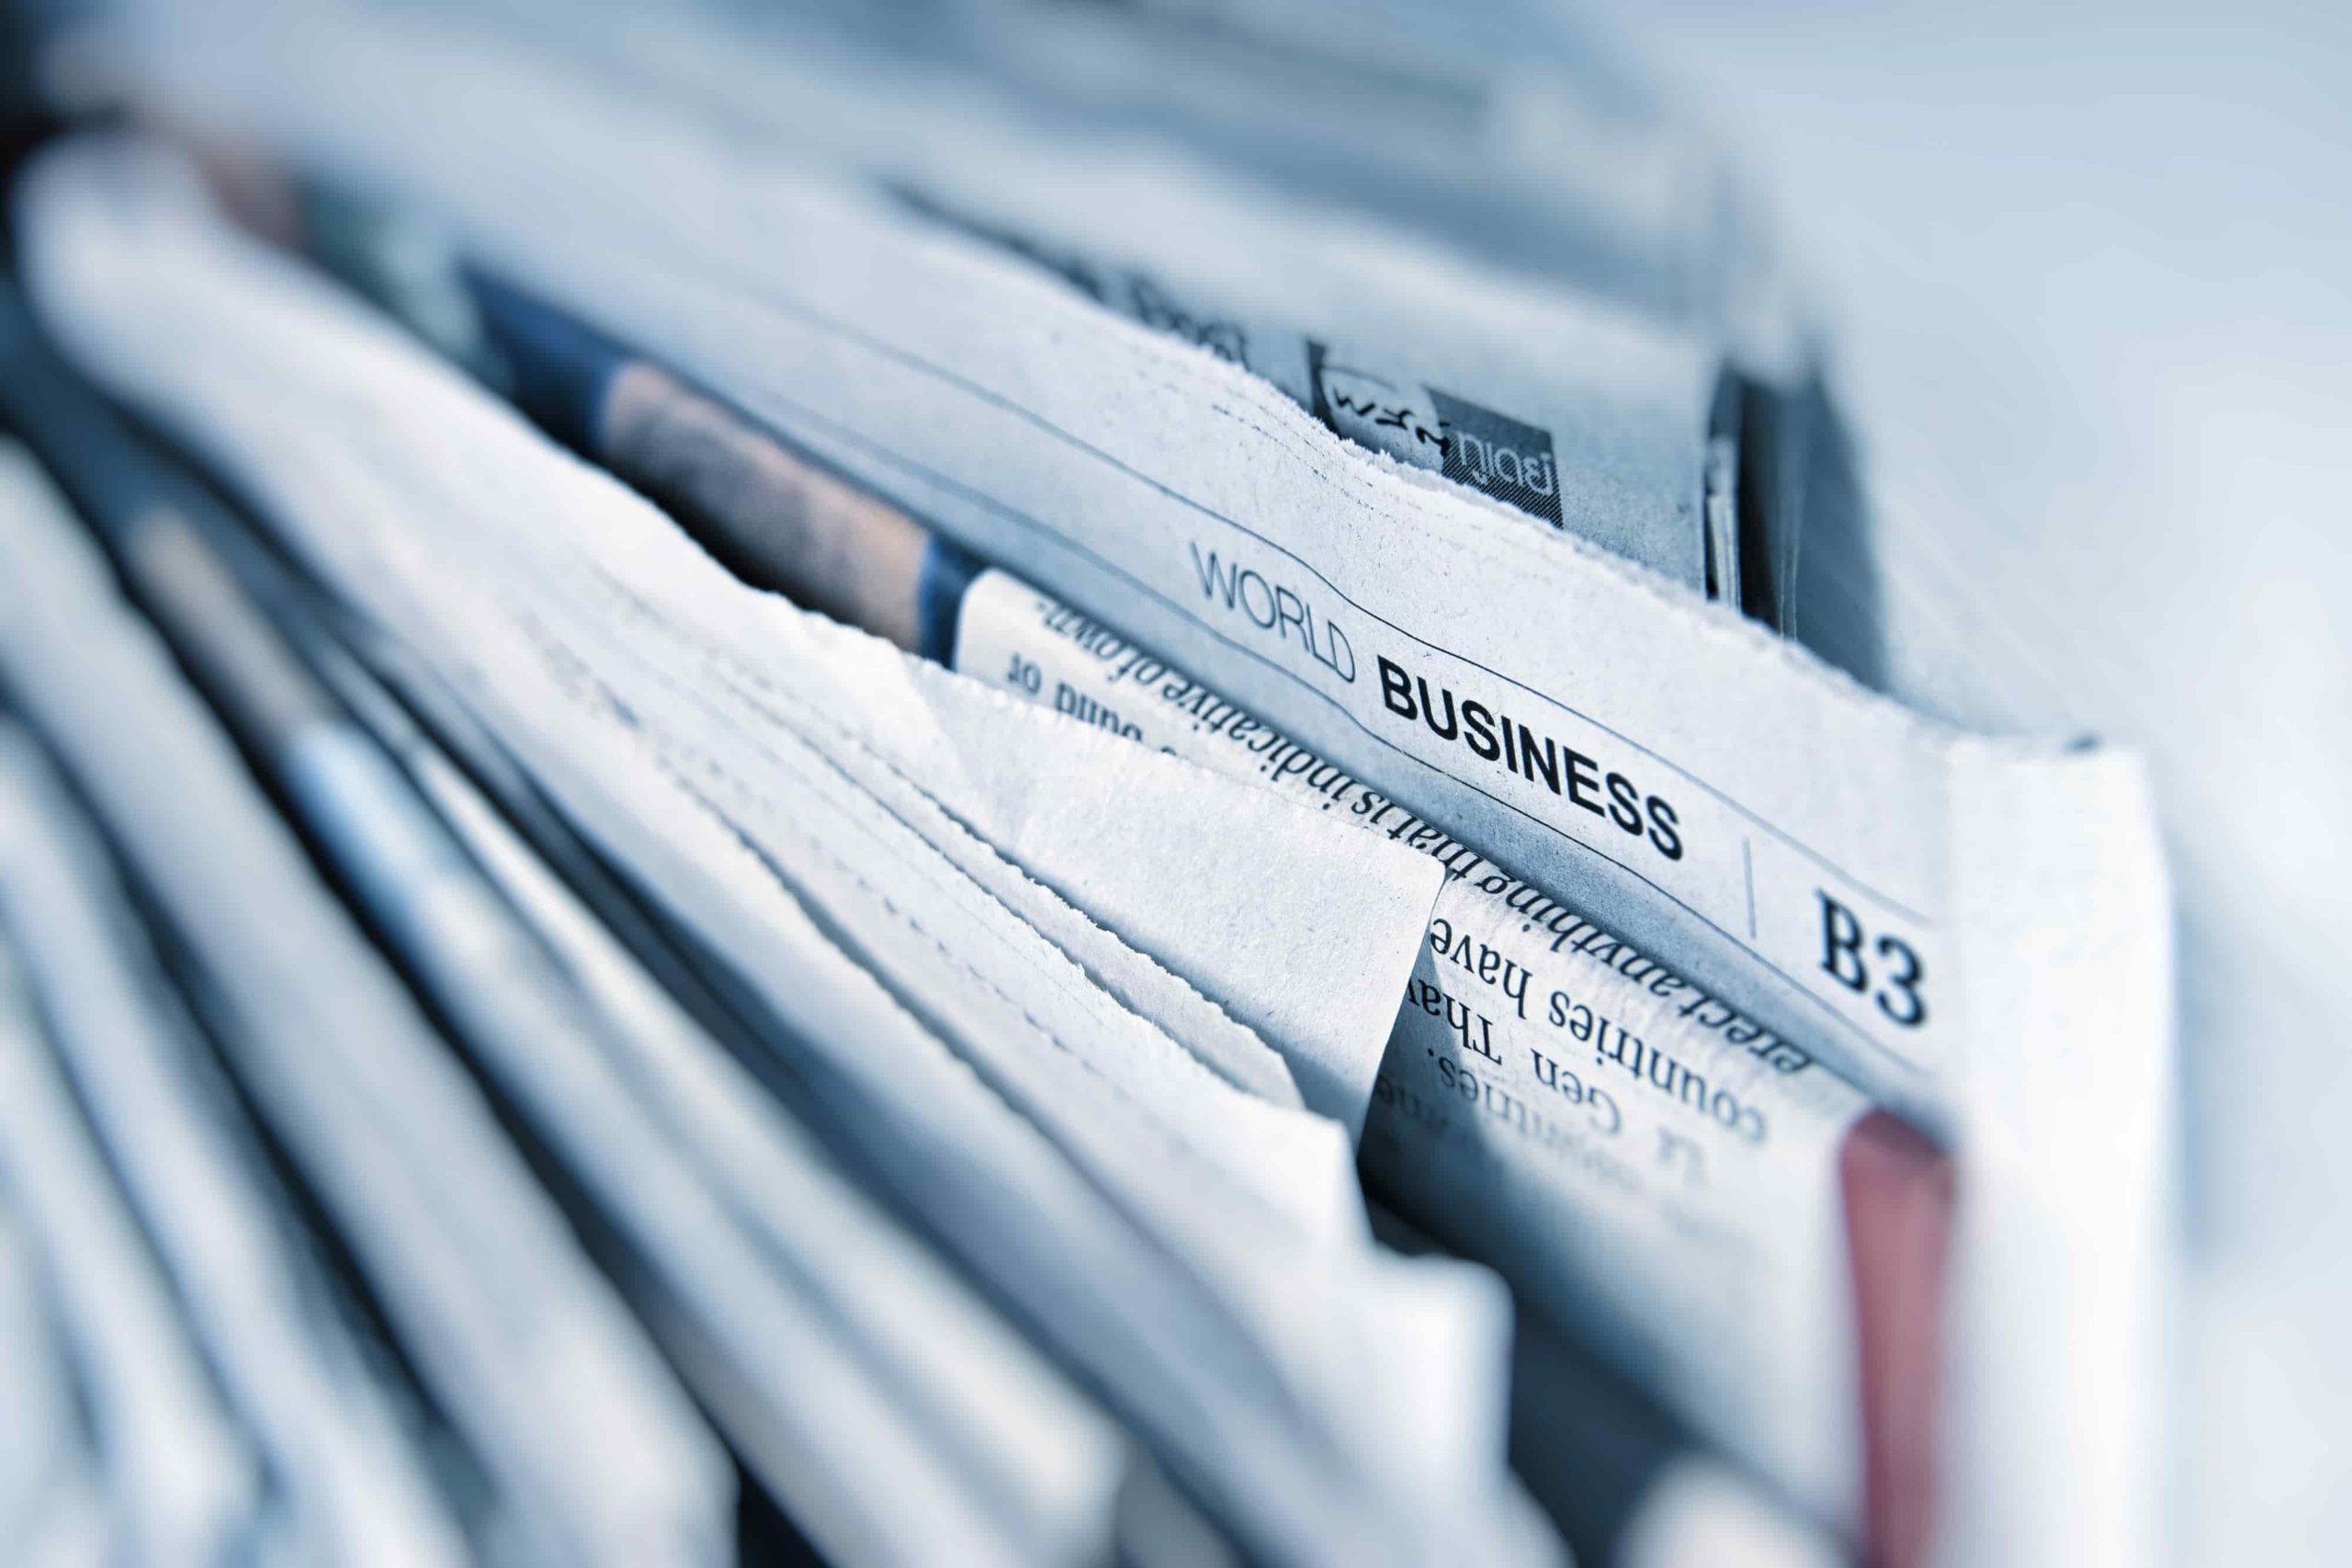 What are the key elements a press release can help you with?